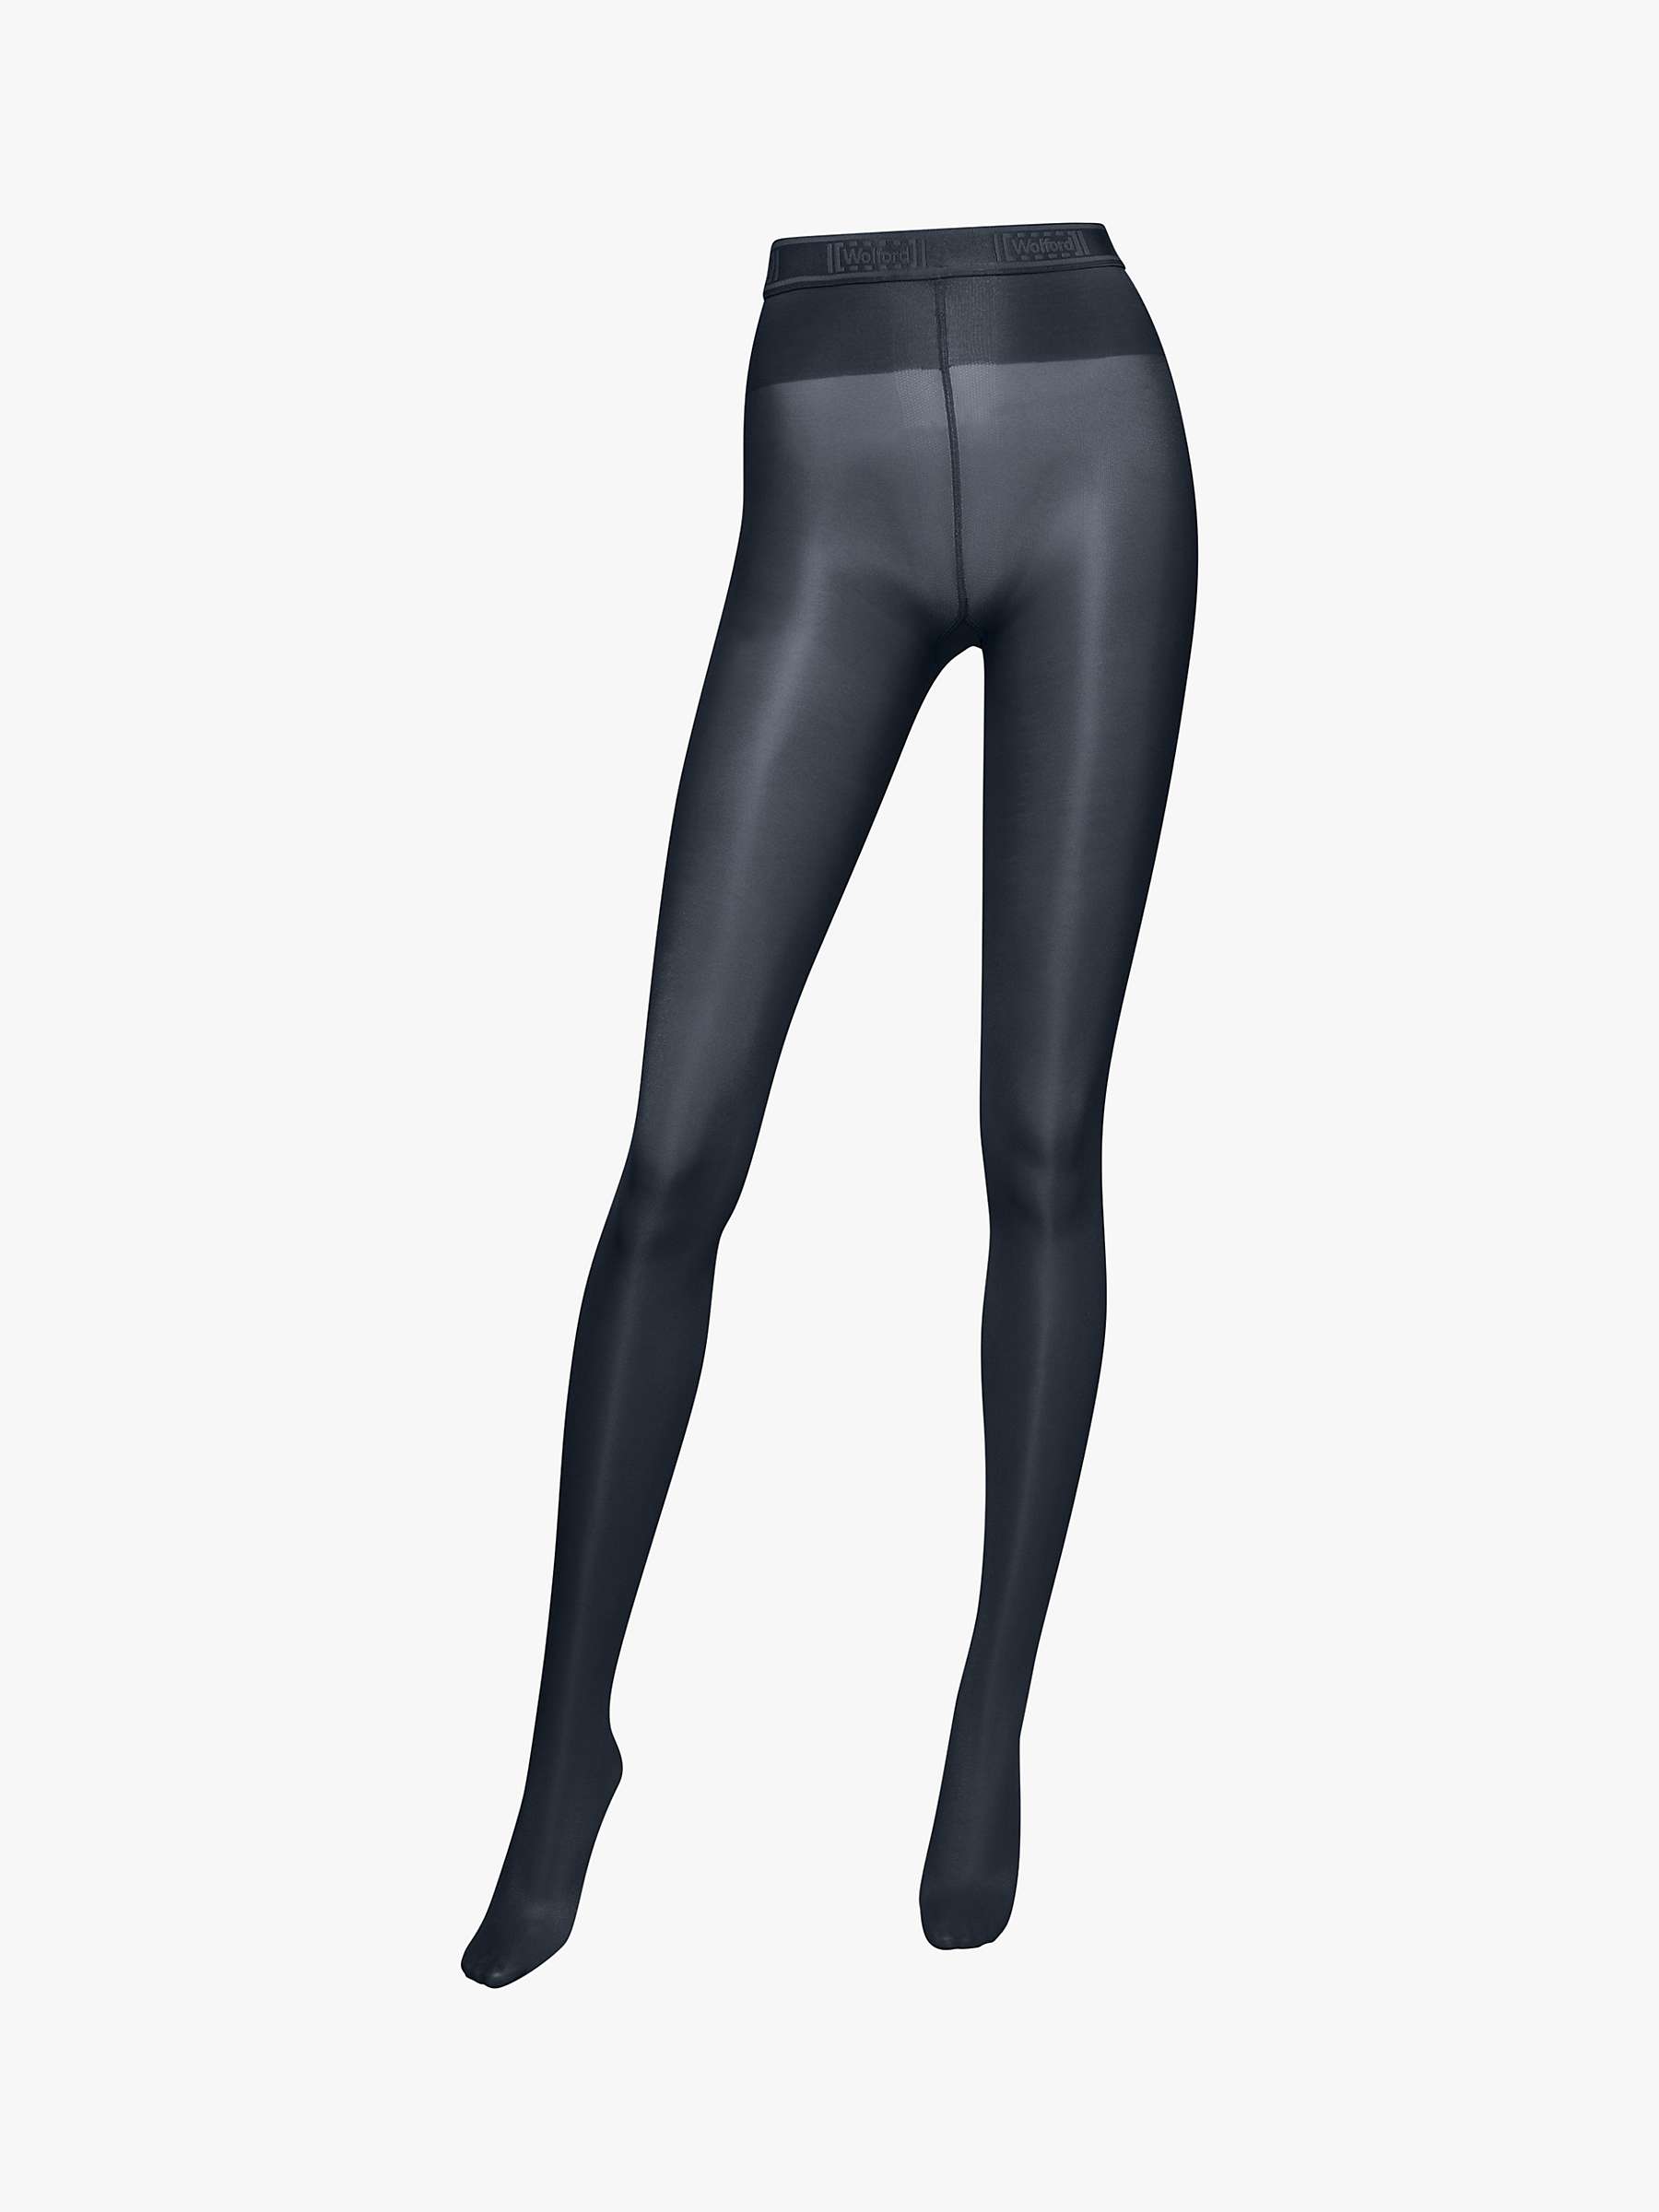 Buy Wolford Neon 40 Semi Sheer Shimmer Tights Online at johnlewis.com